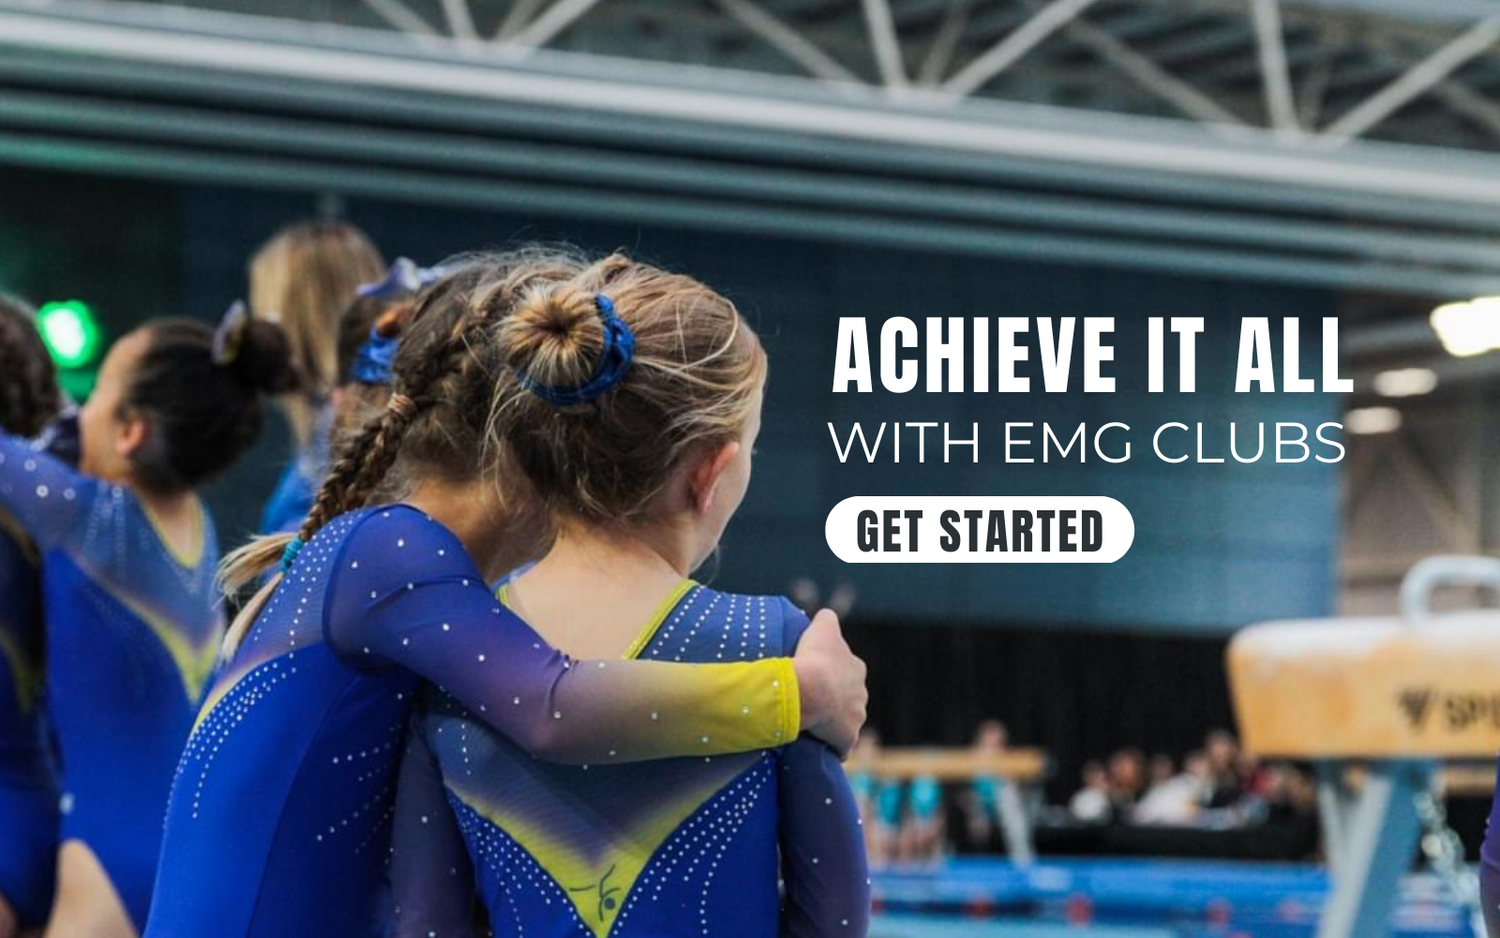 Achieve It All with EMG Clubs